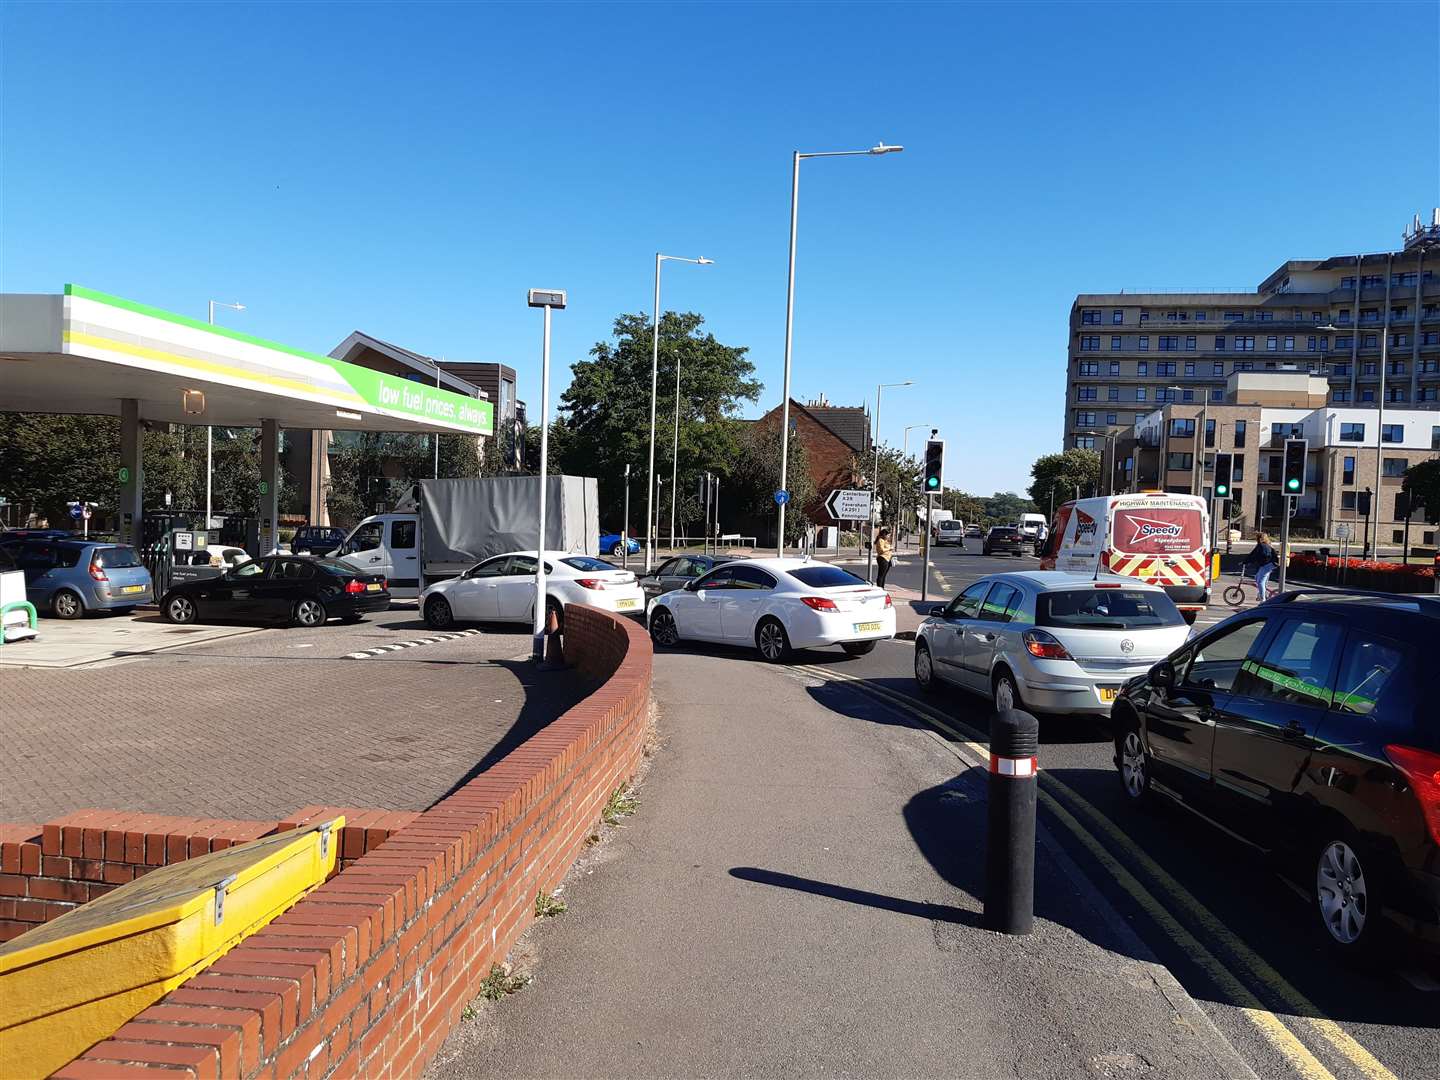 Ashford Service Station on the ring road is backed up